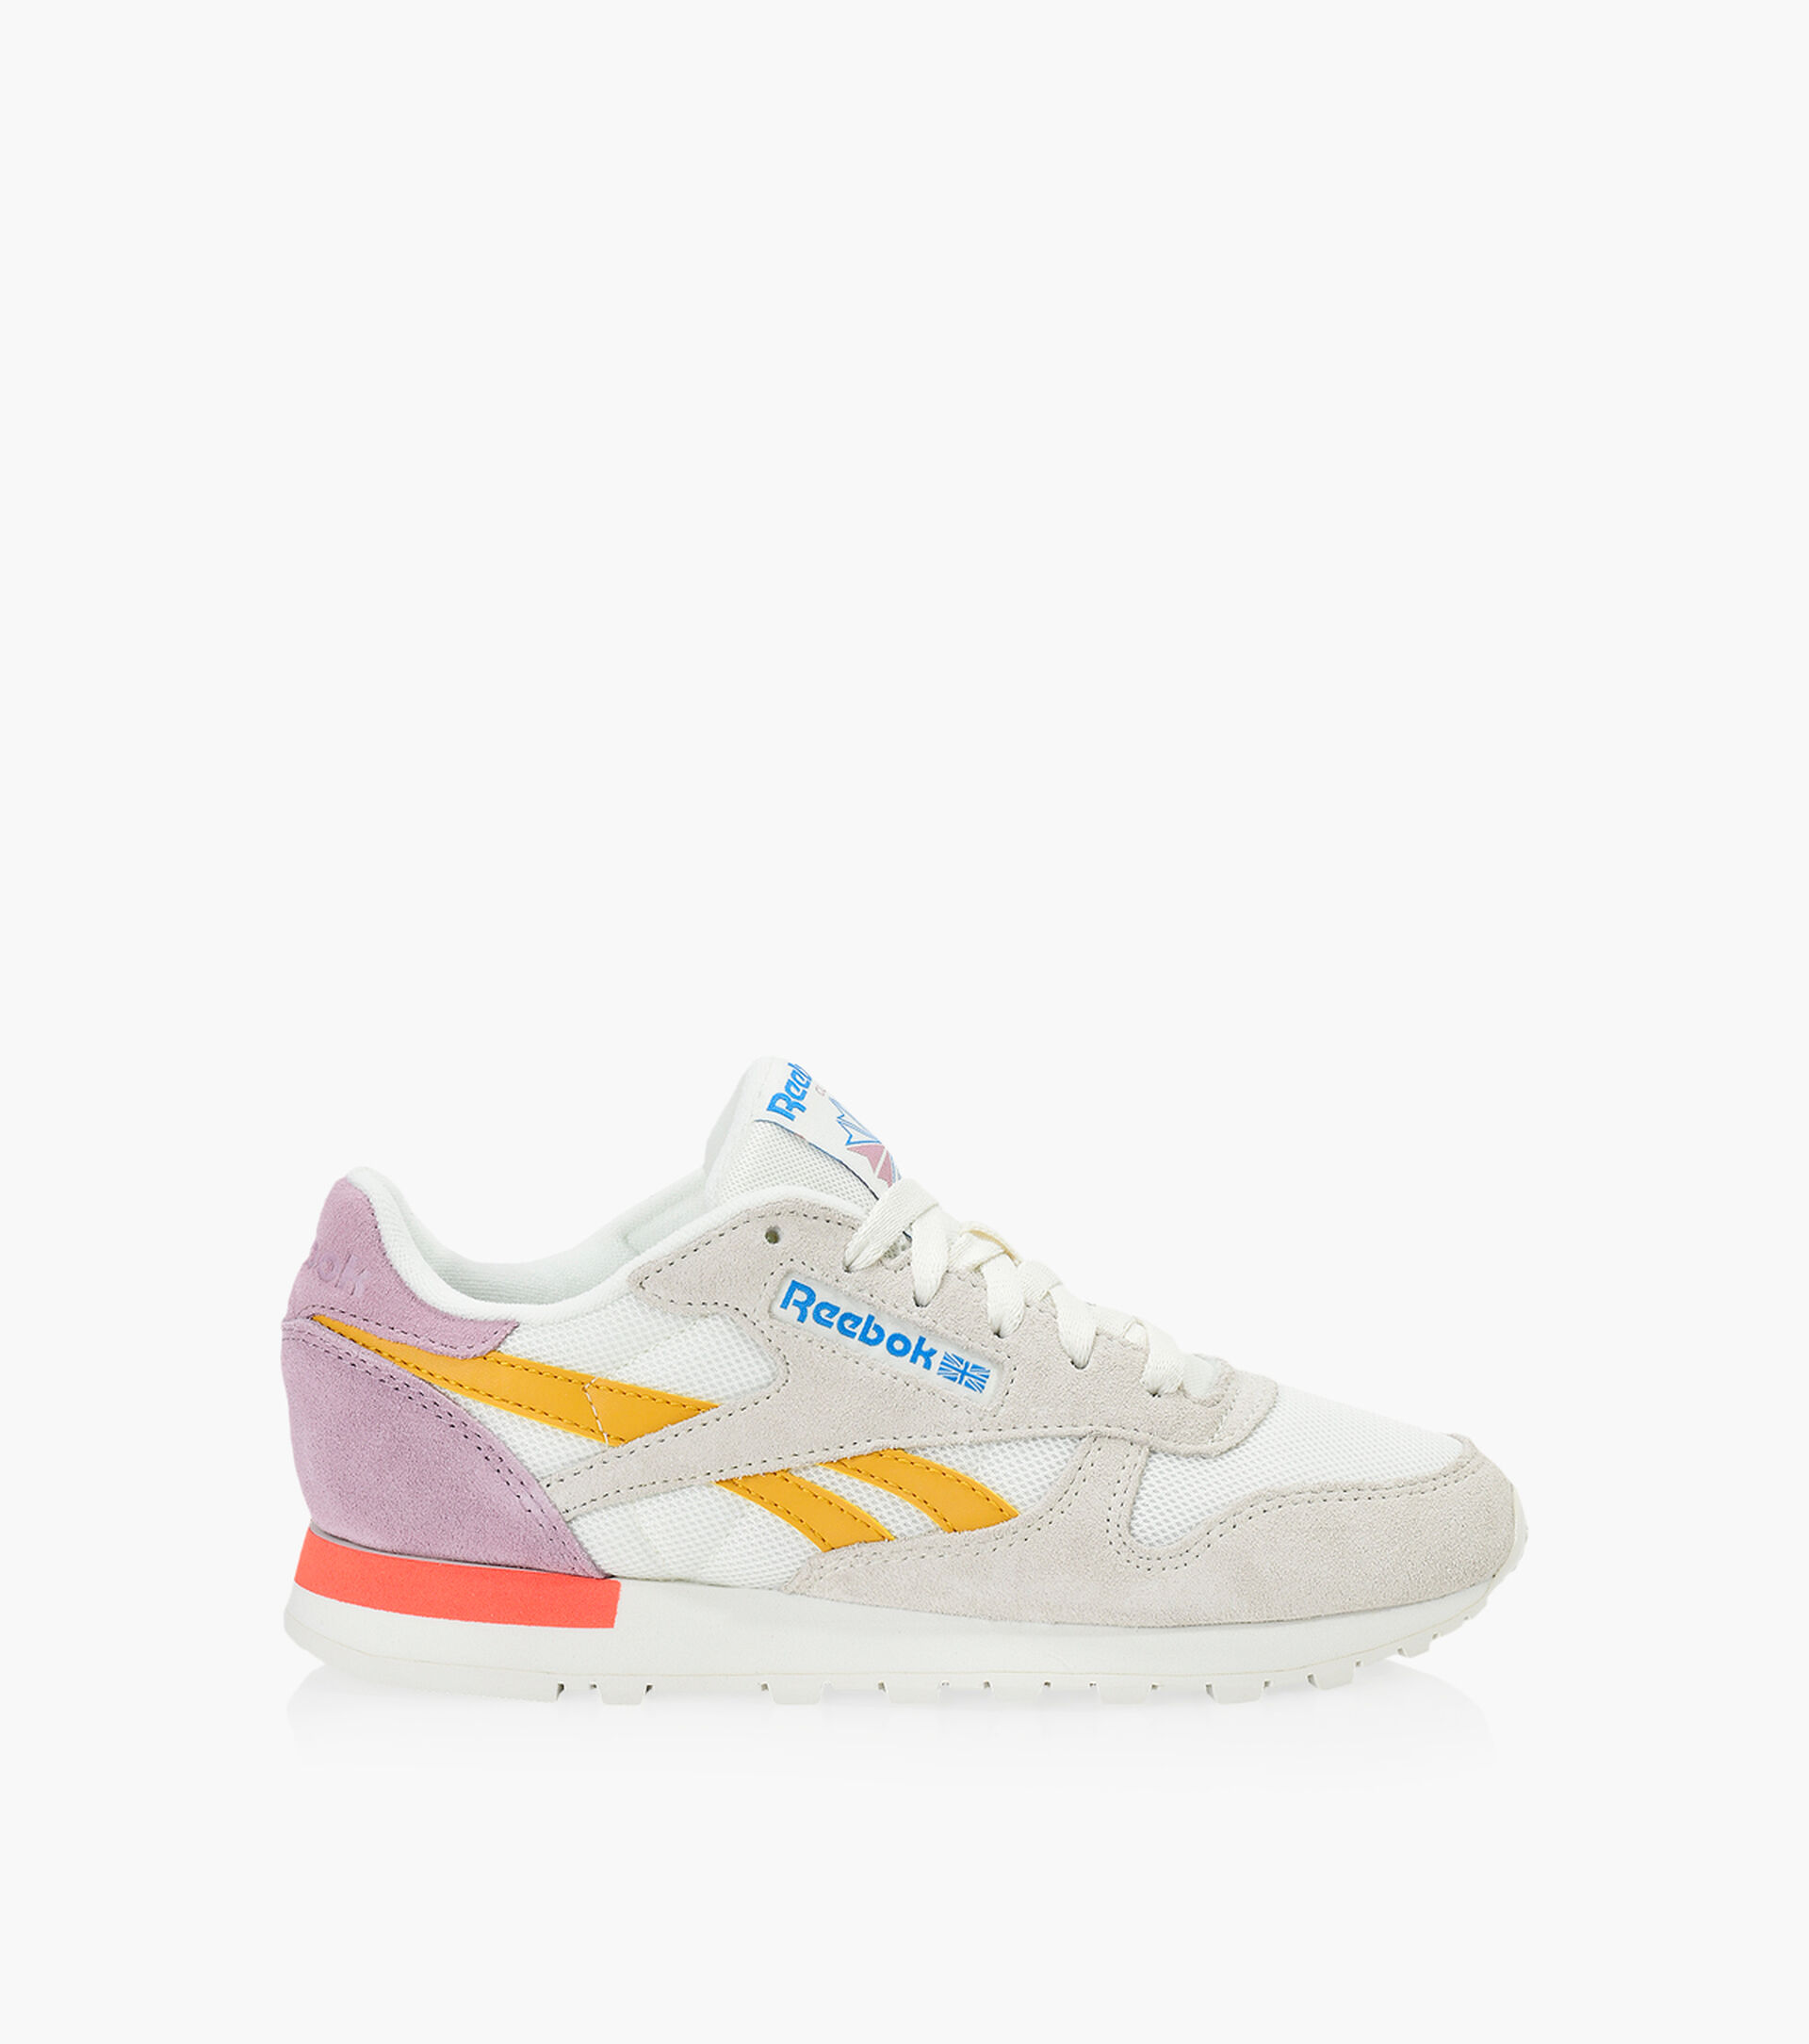 REEBOK CLASSIC LEATHER - White & Colour | Browns Shoes